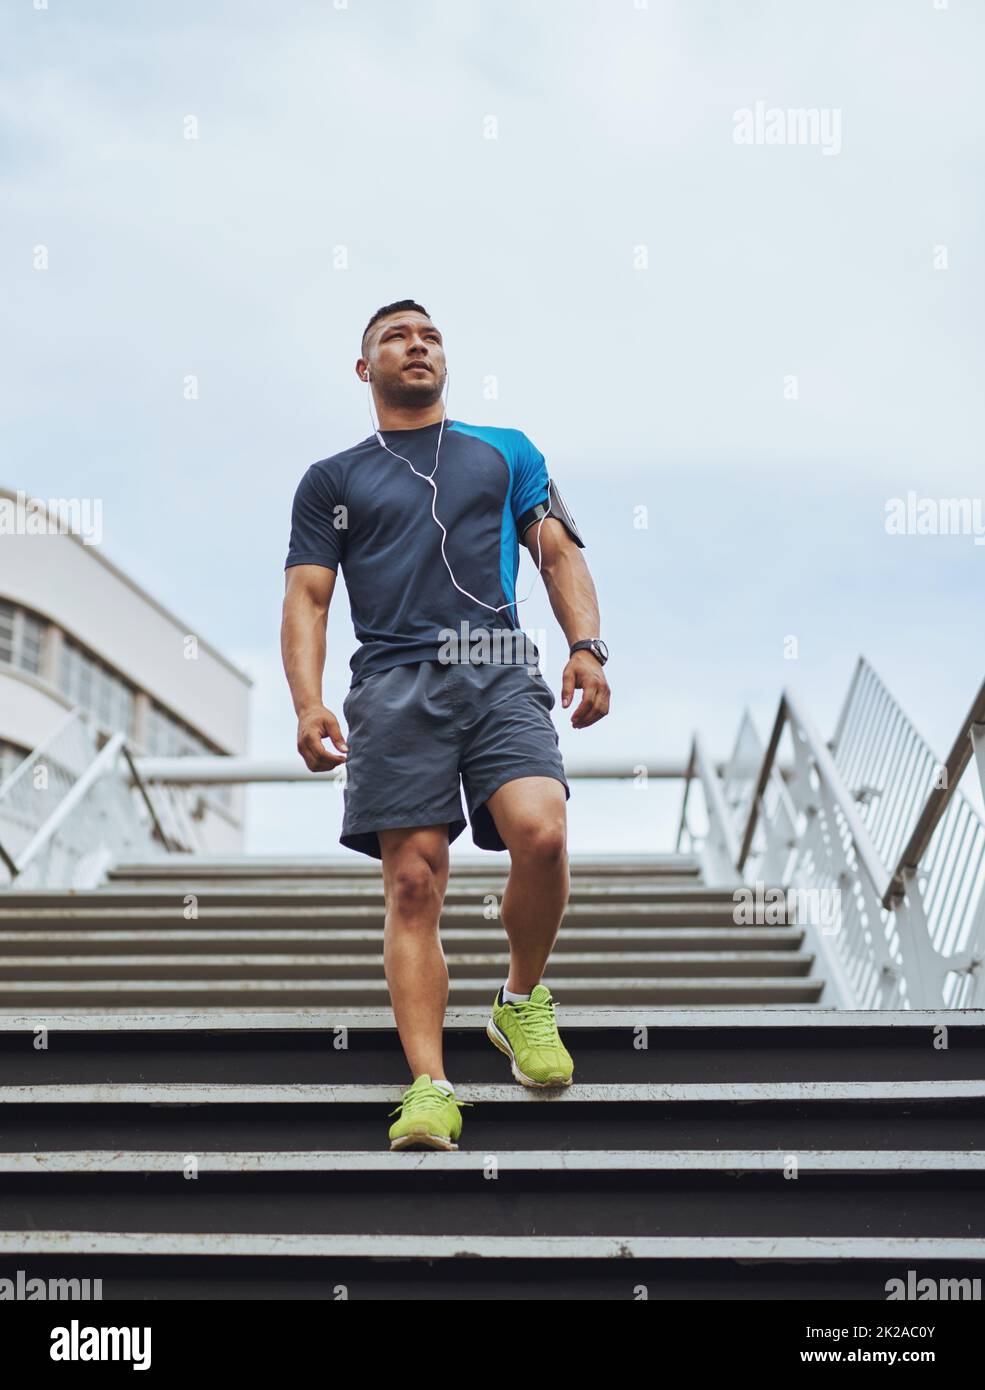 Time for some serious exercise. Low angle shot of a young man out for a run in the city. Stock Photo